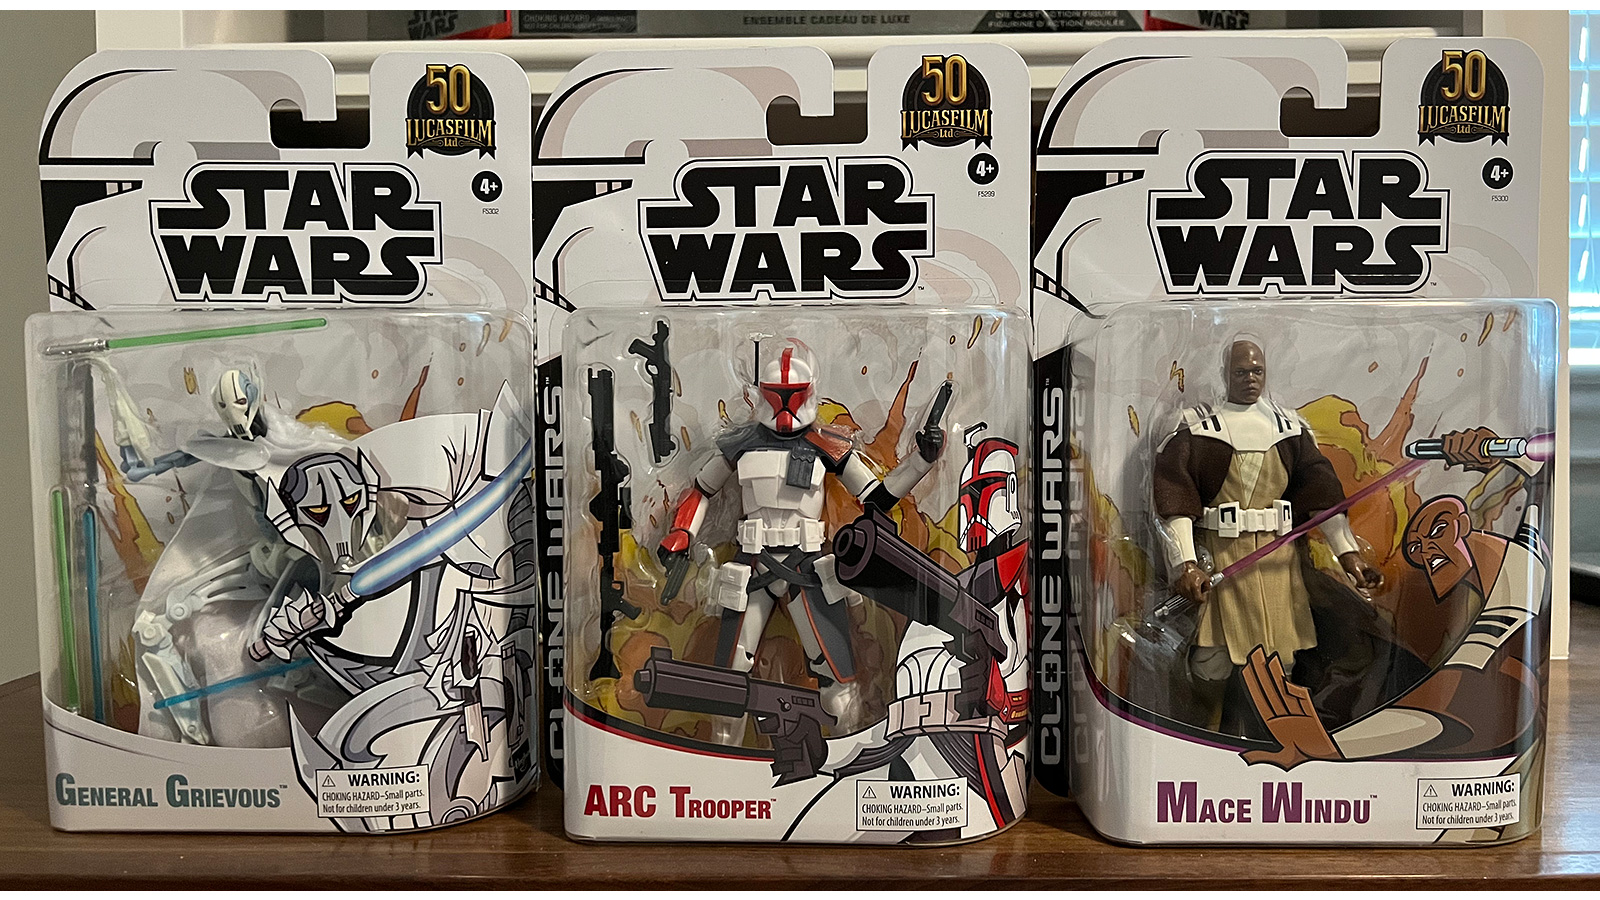 Mail Call 4/10/22 - Walmart Exclusive TBS 6-Inch Clone Wars General Grievous, Mace Windu, And ARC Trooper Figures